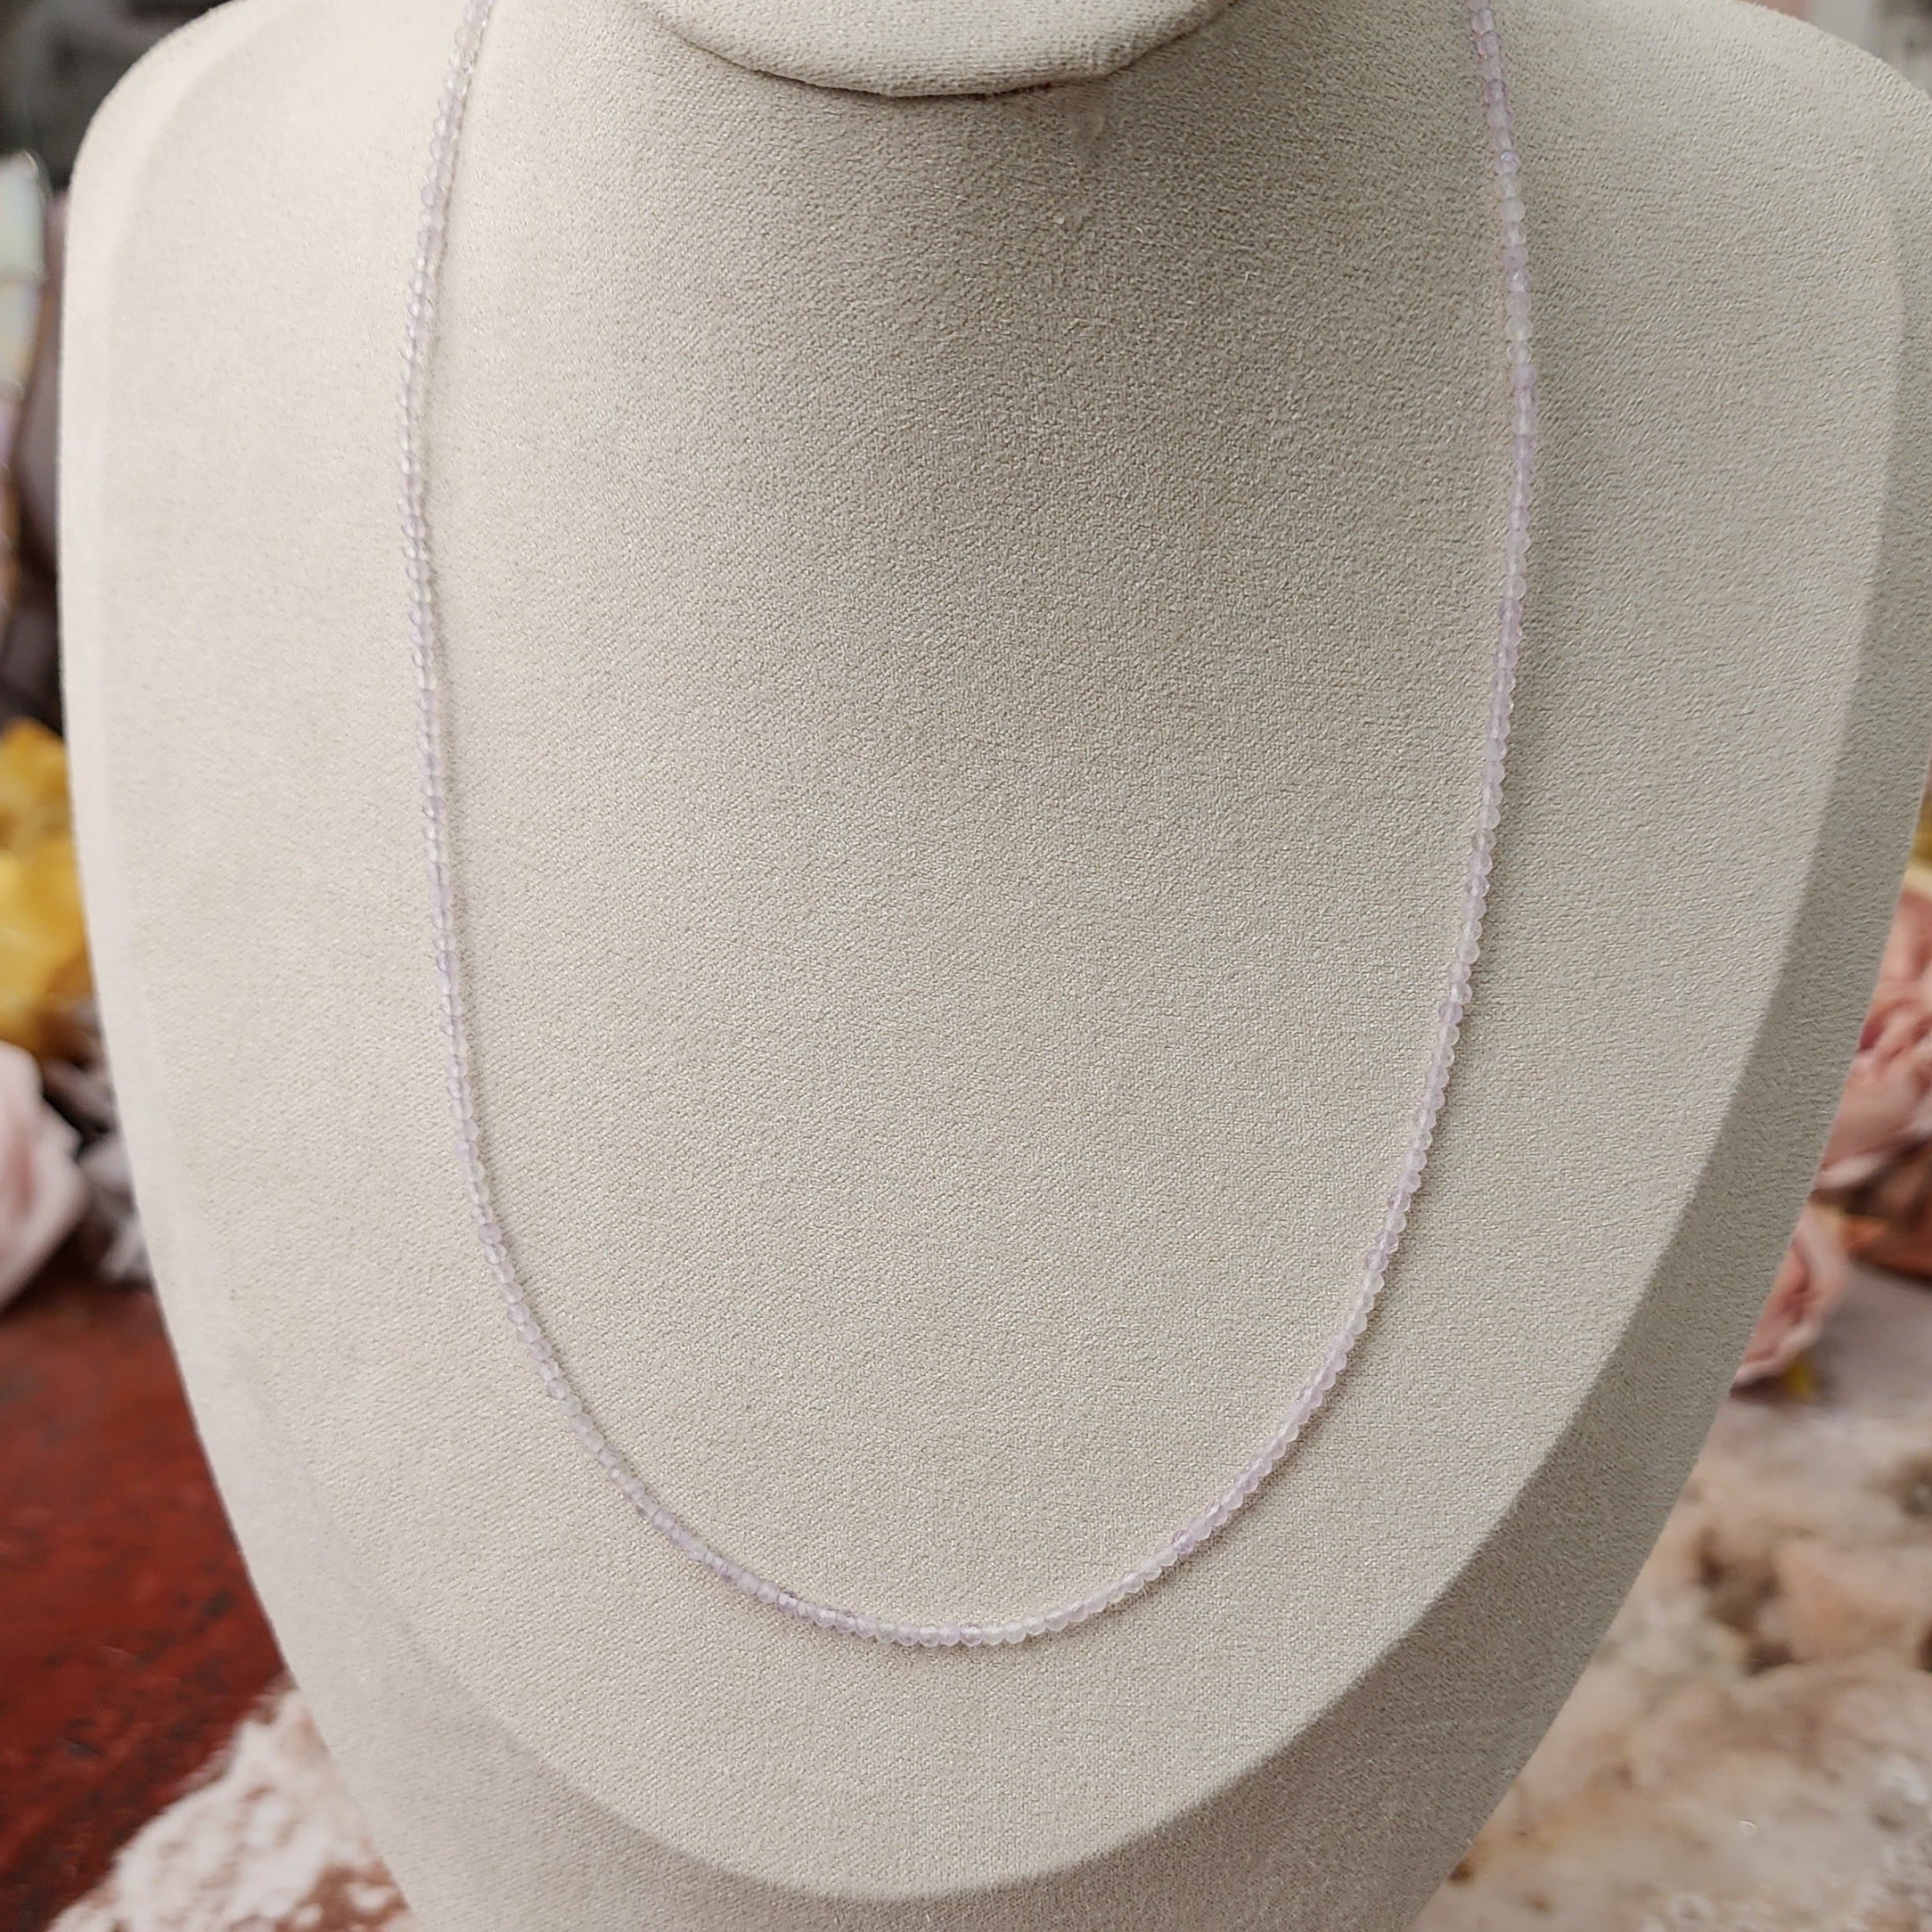 Rose Quartz Micro Faceted Necklace for Compassion and Love